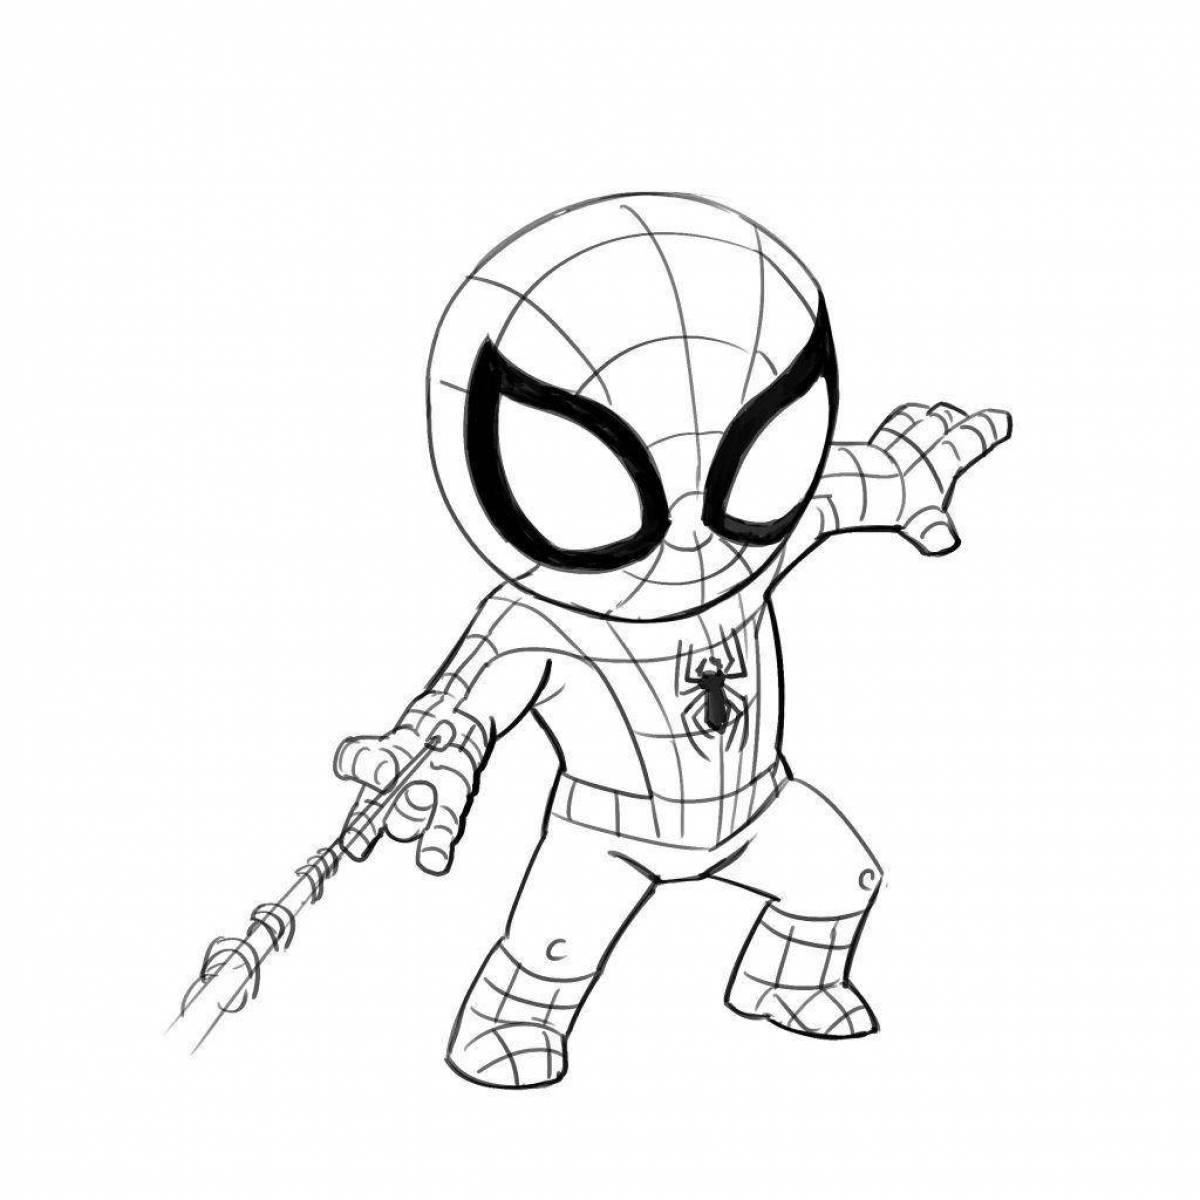 Deadpool and spiderman coloring page for kids